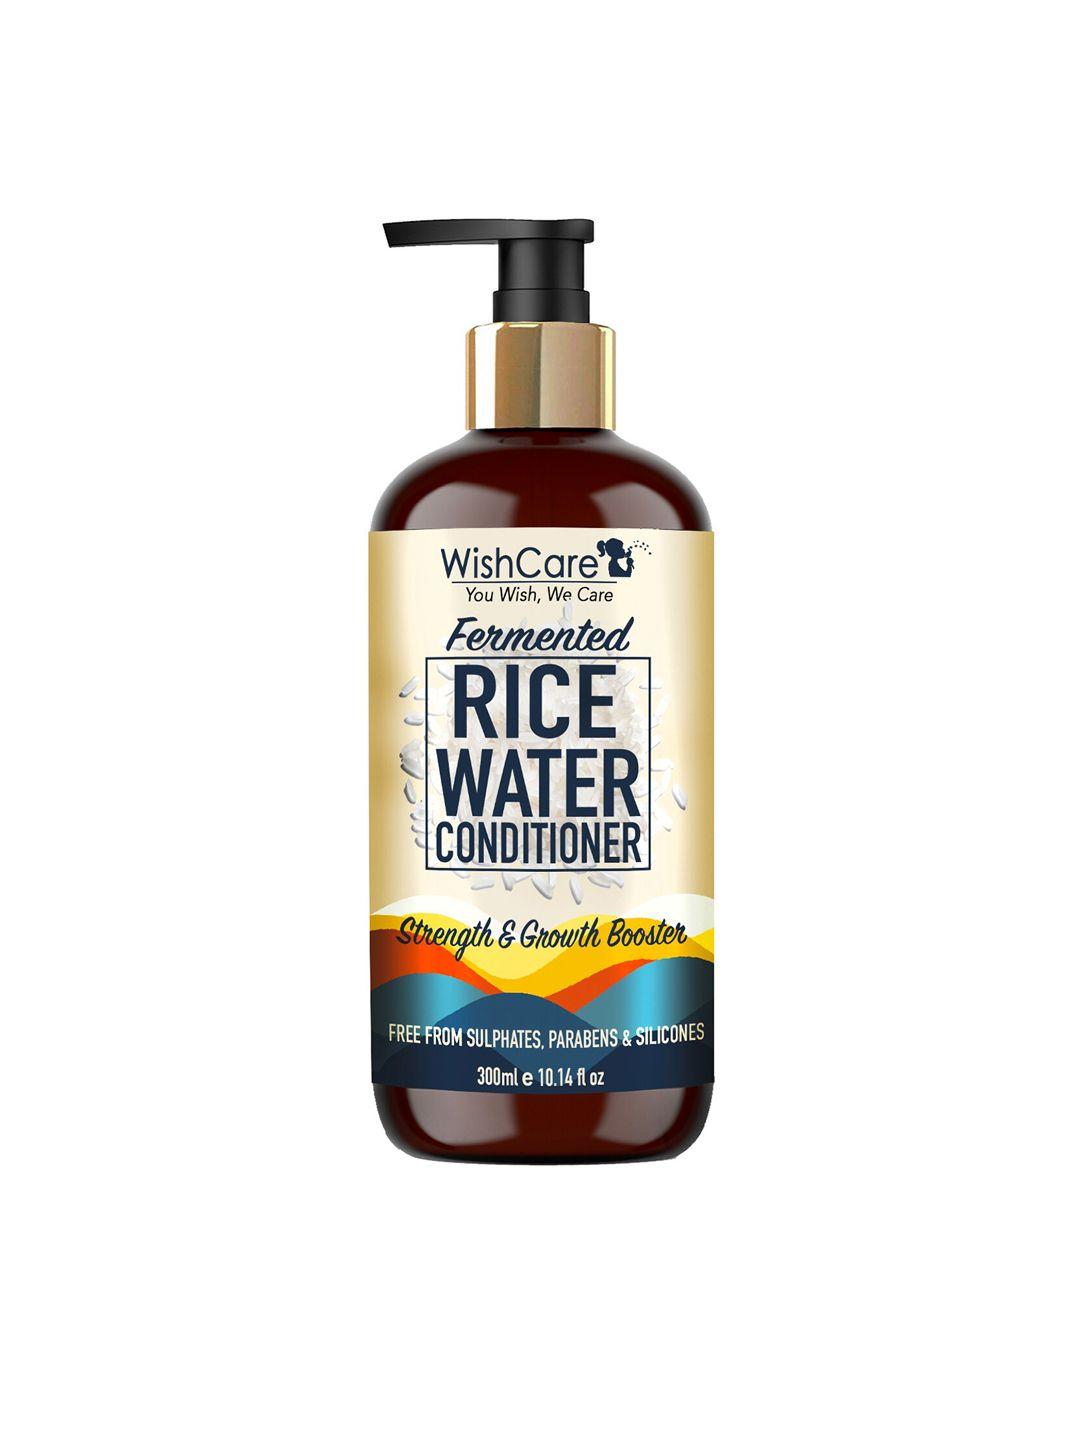 wishcare fermented rice water conditioner - strength & growth formula 300 g